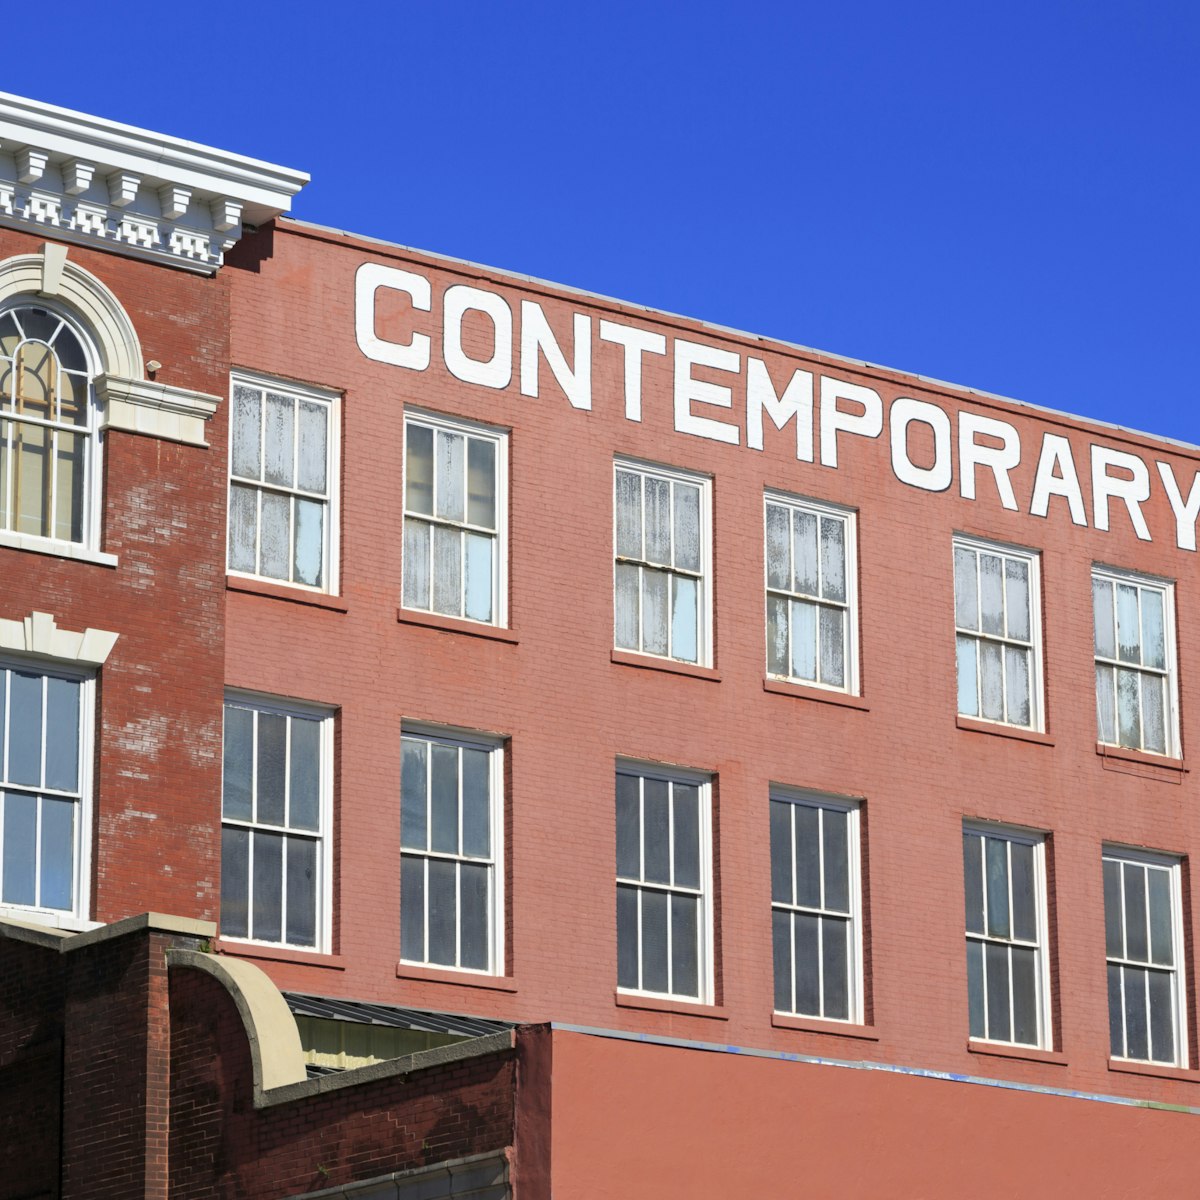 Contemporary Arts Center, New Orleans